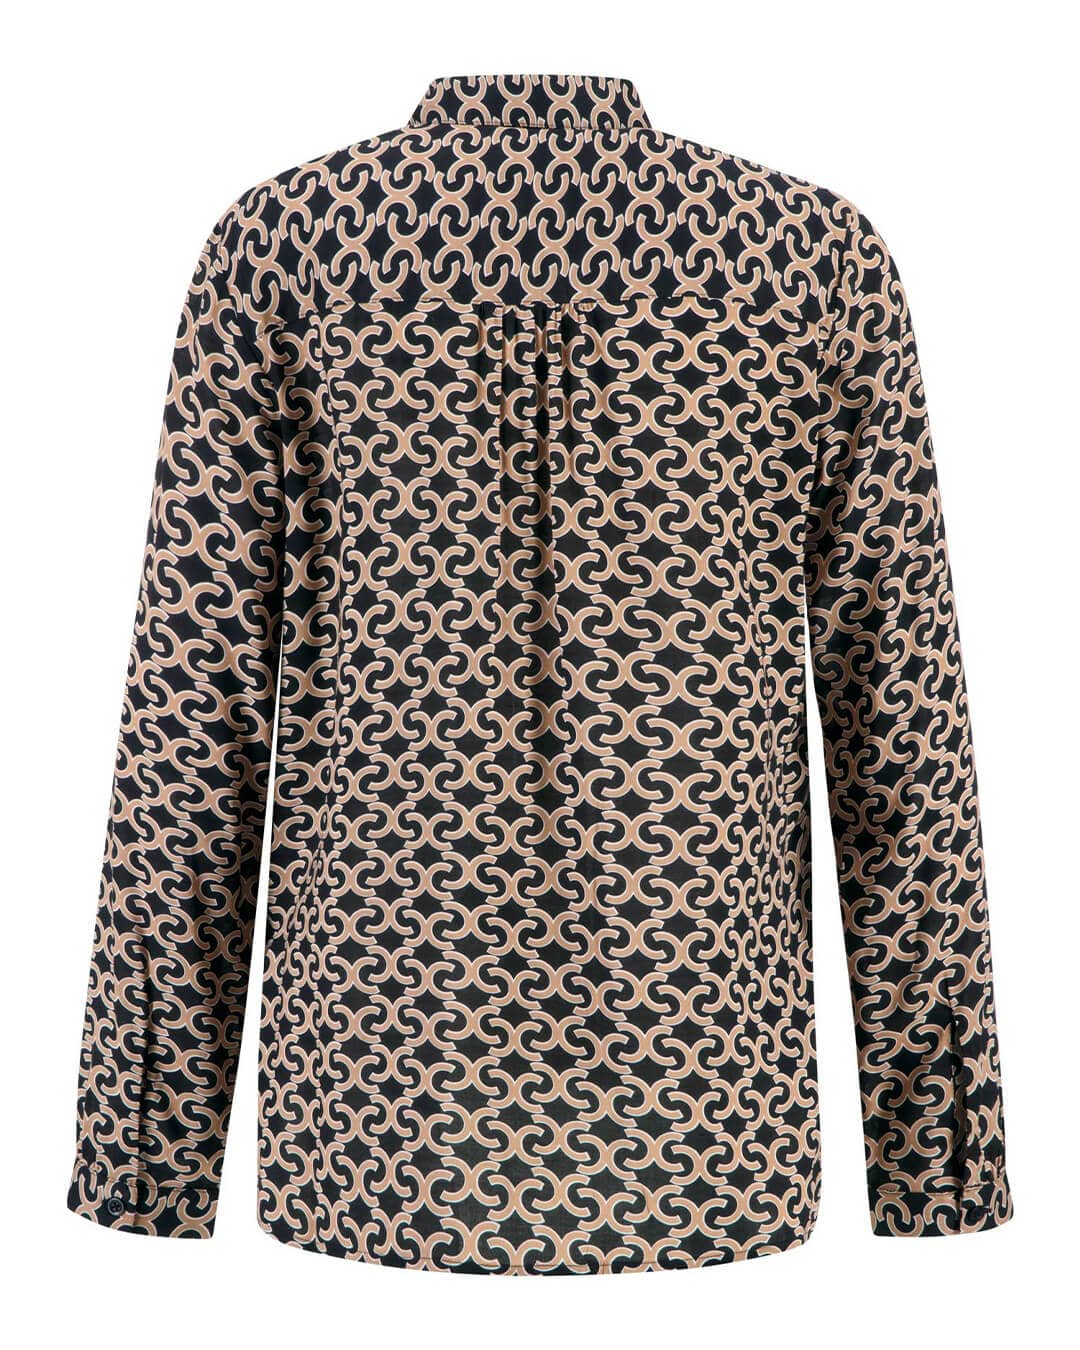 Fynch-Hatton Blouses Fynch-Hatton Black Long Sleeved Printed Blouse